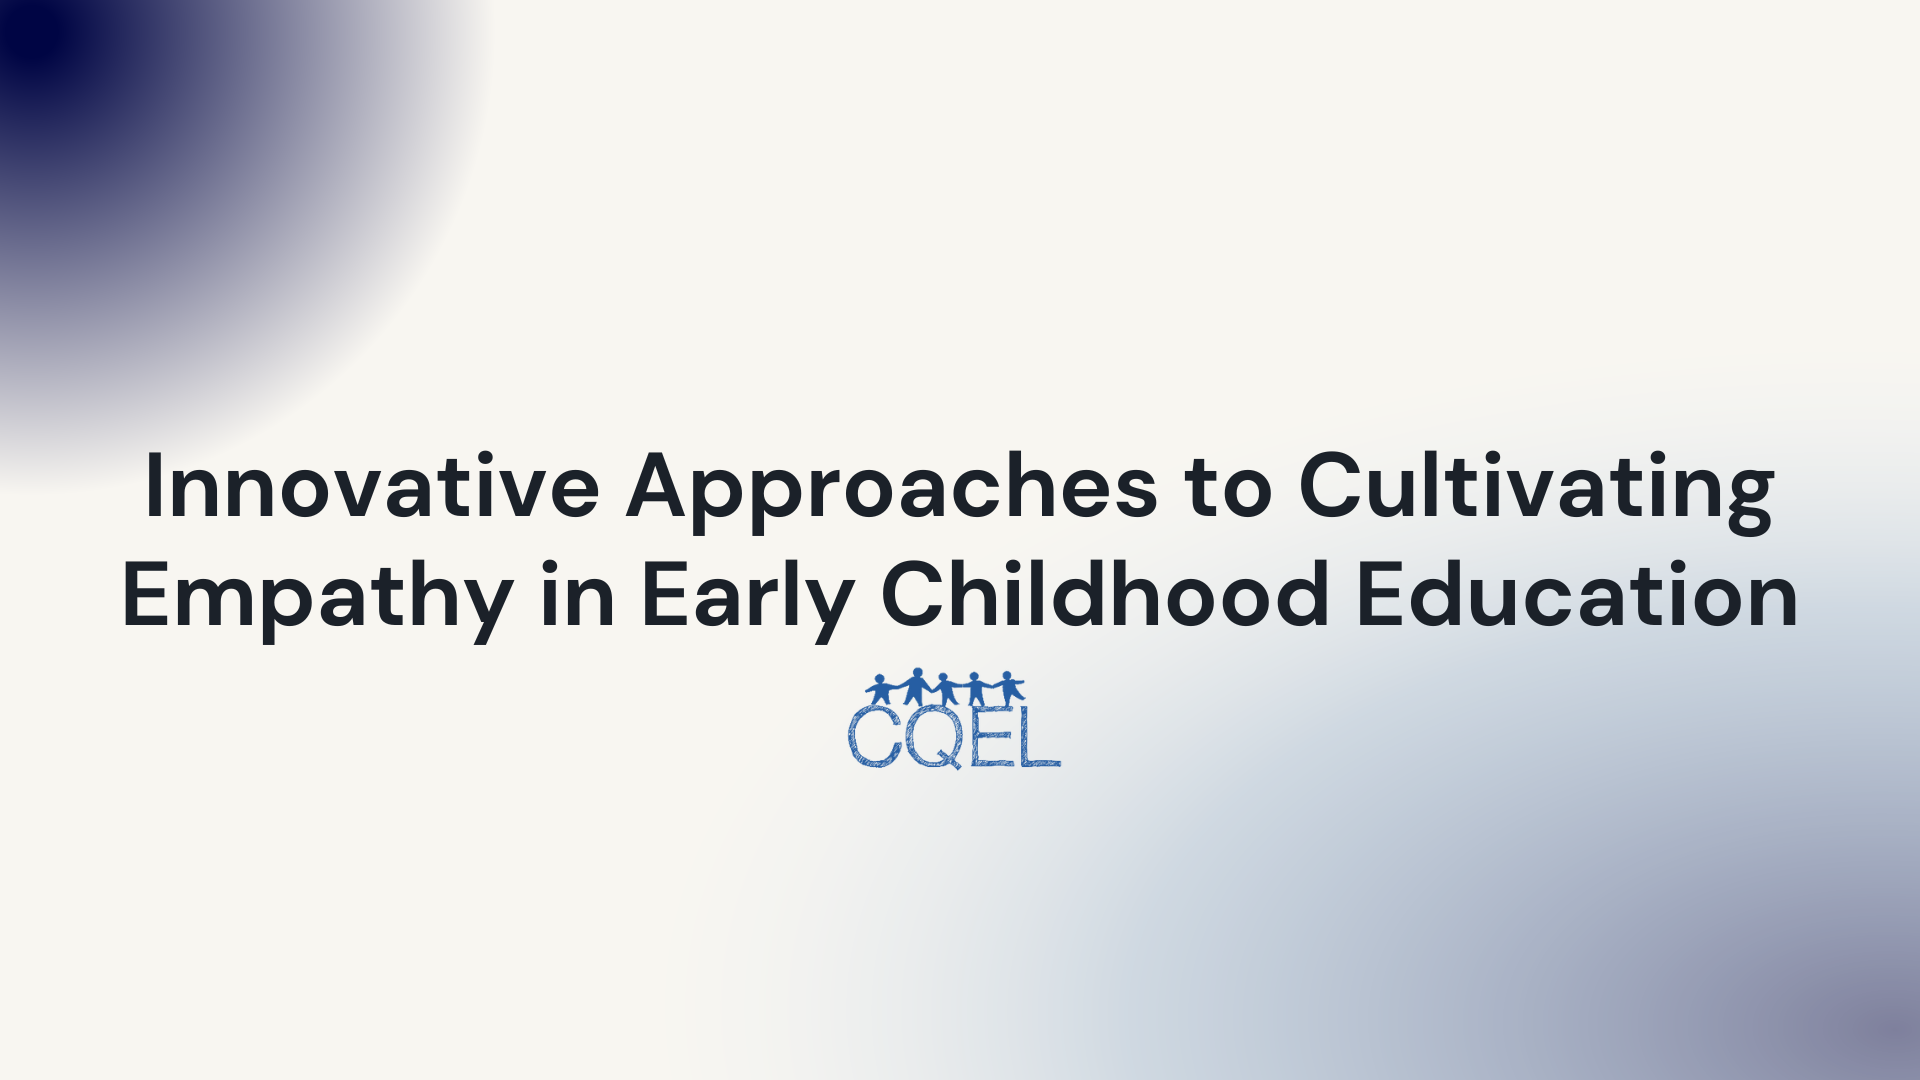 Innovative Approaches to Cultivating Empathy in Early Childhood Education